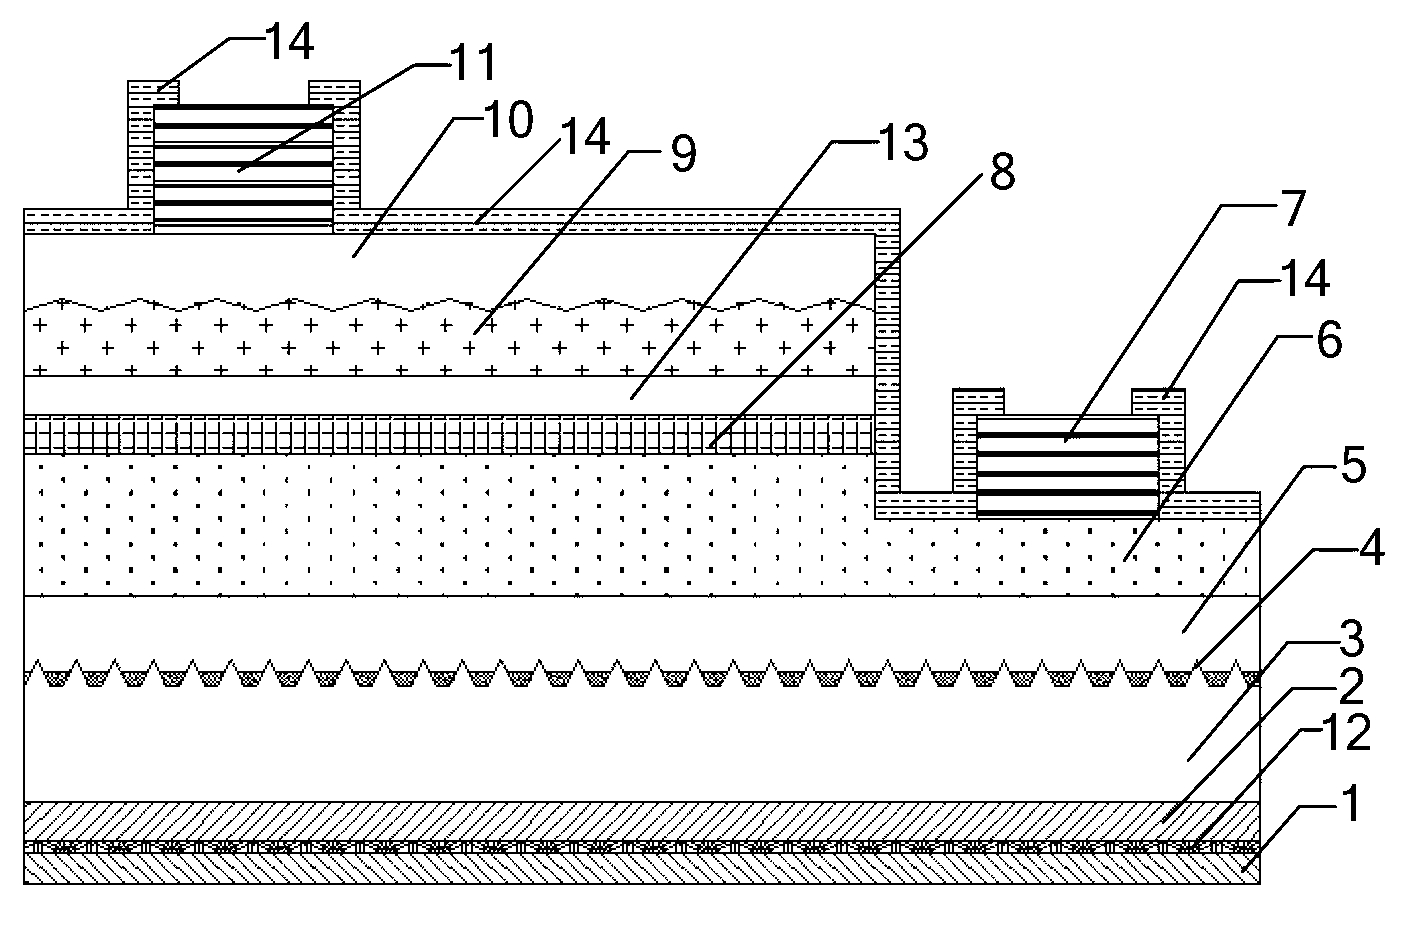 Light-emitting diode (LED) with reflector structure